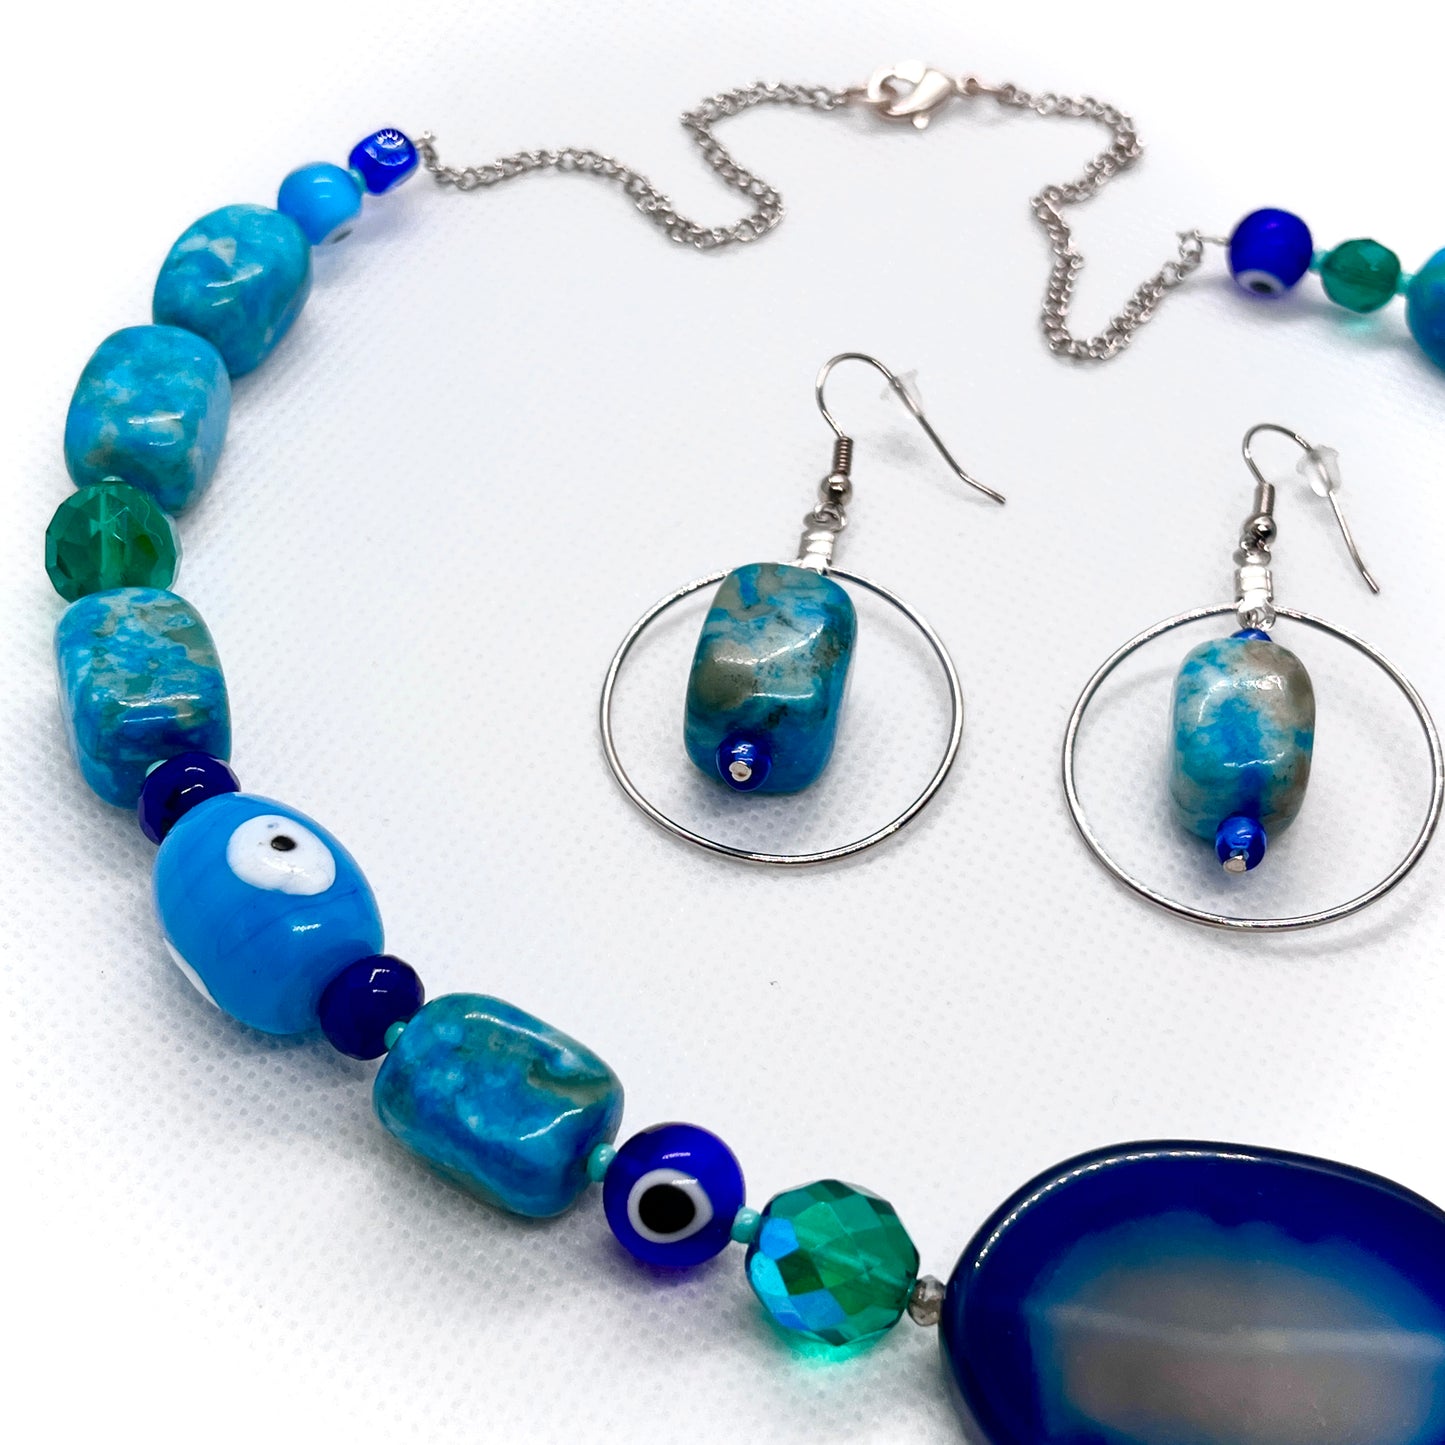 The Good Kinda Blues Necklace and Earrings Set